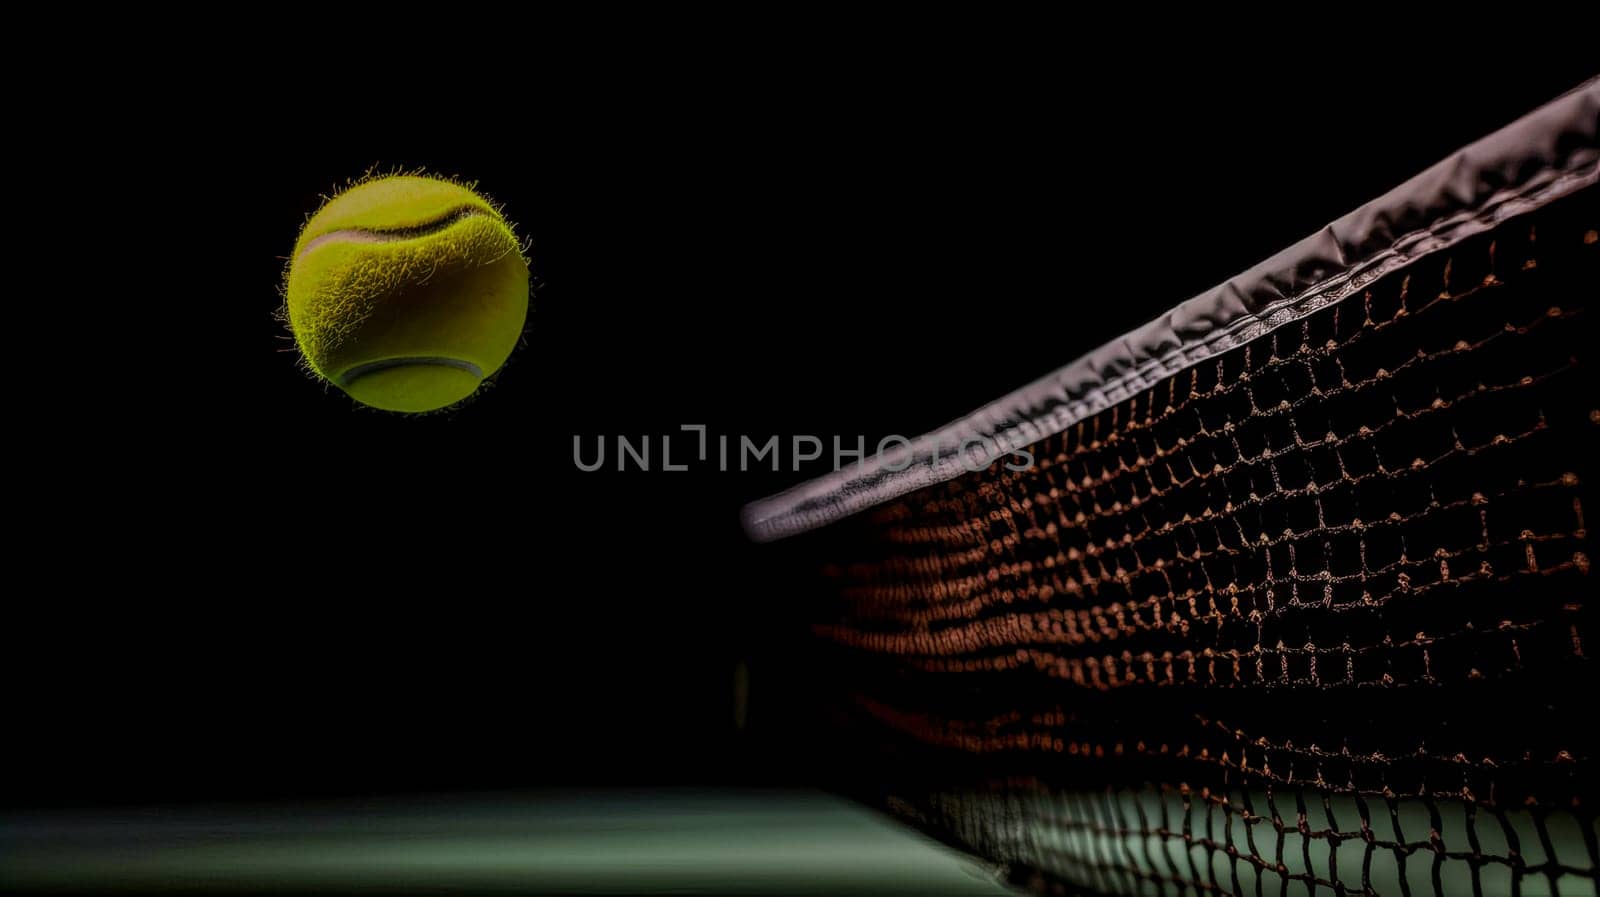 Tennis ball splash in air. Green Tennis ball fly in rain and splatter spin splash in droplet water. Black background. Playing sports, healthy lifestyle, physical activity, training, active lifestyle, competition, Preparation for big sports.